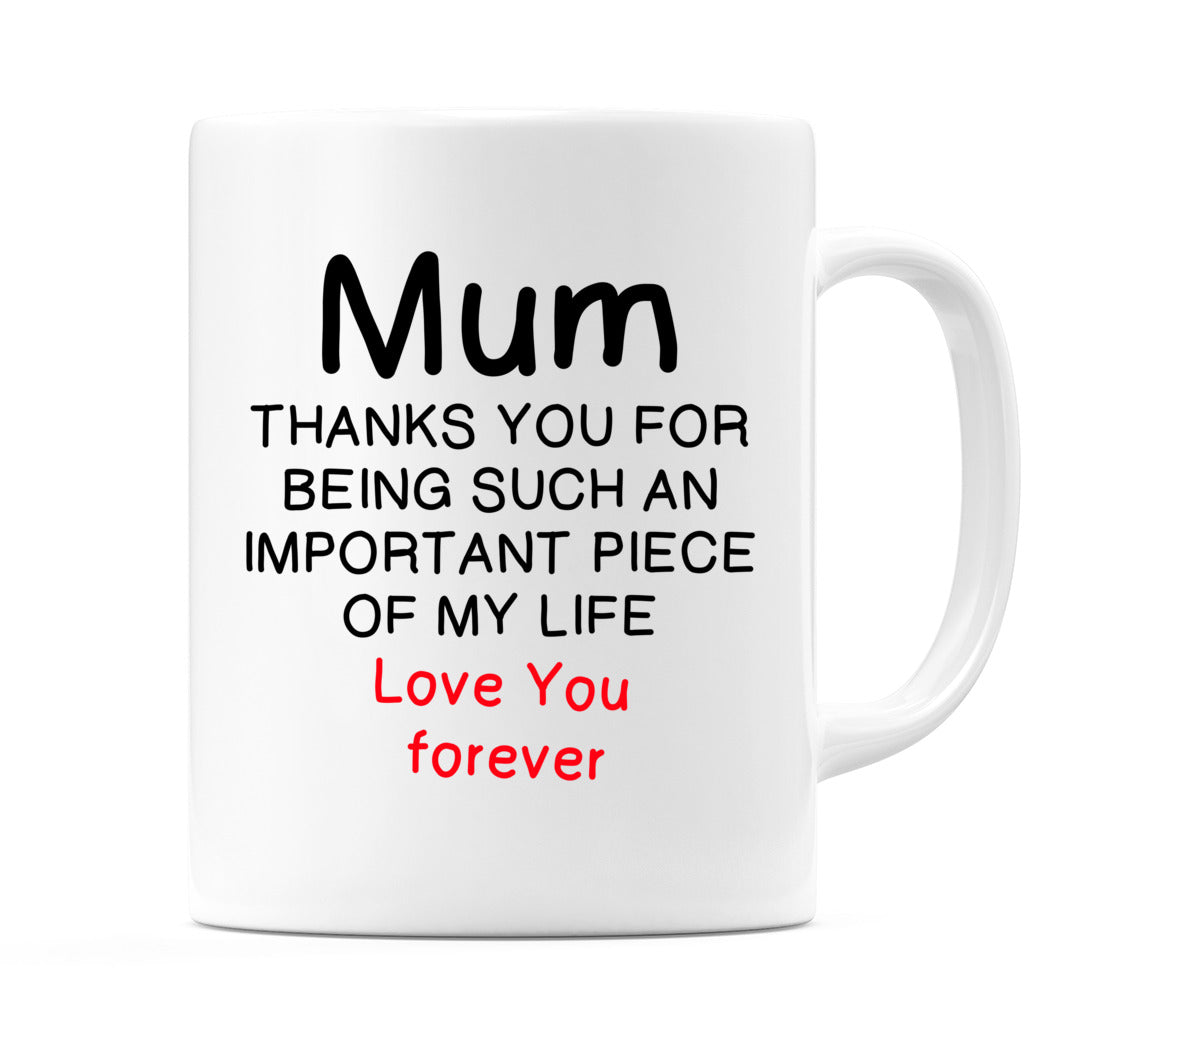 Mum Thanks you for being...